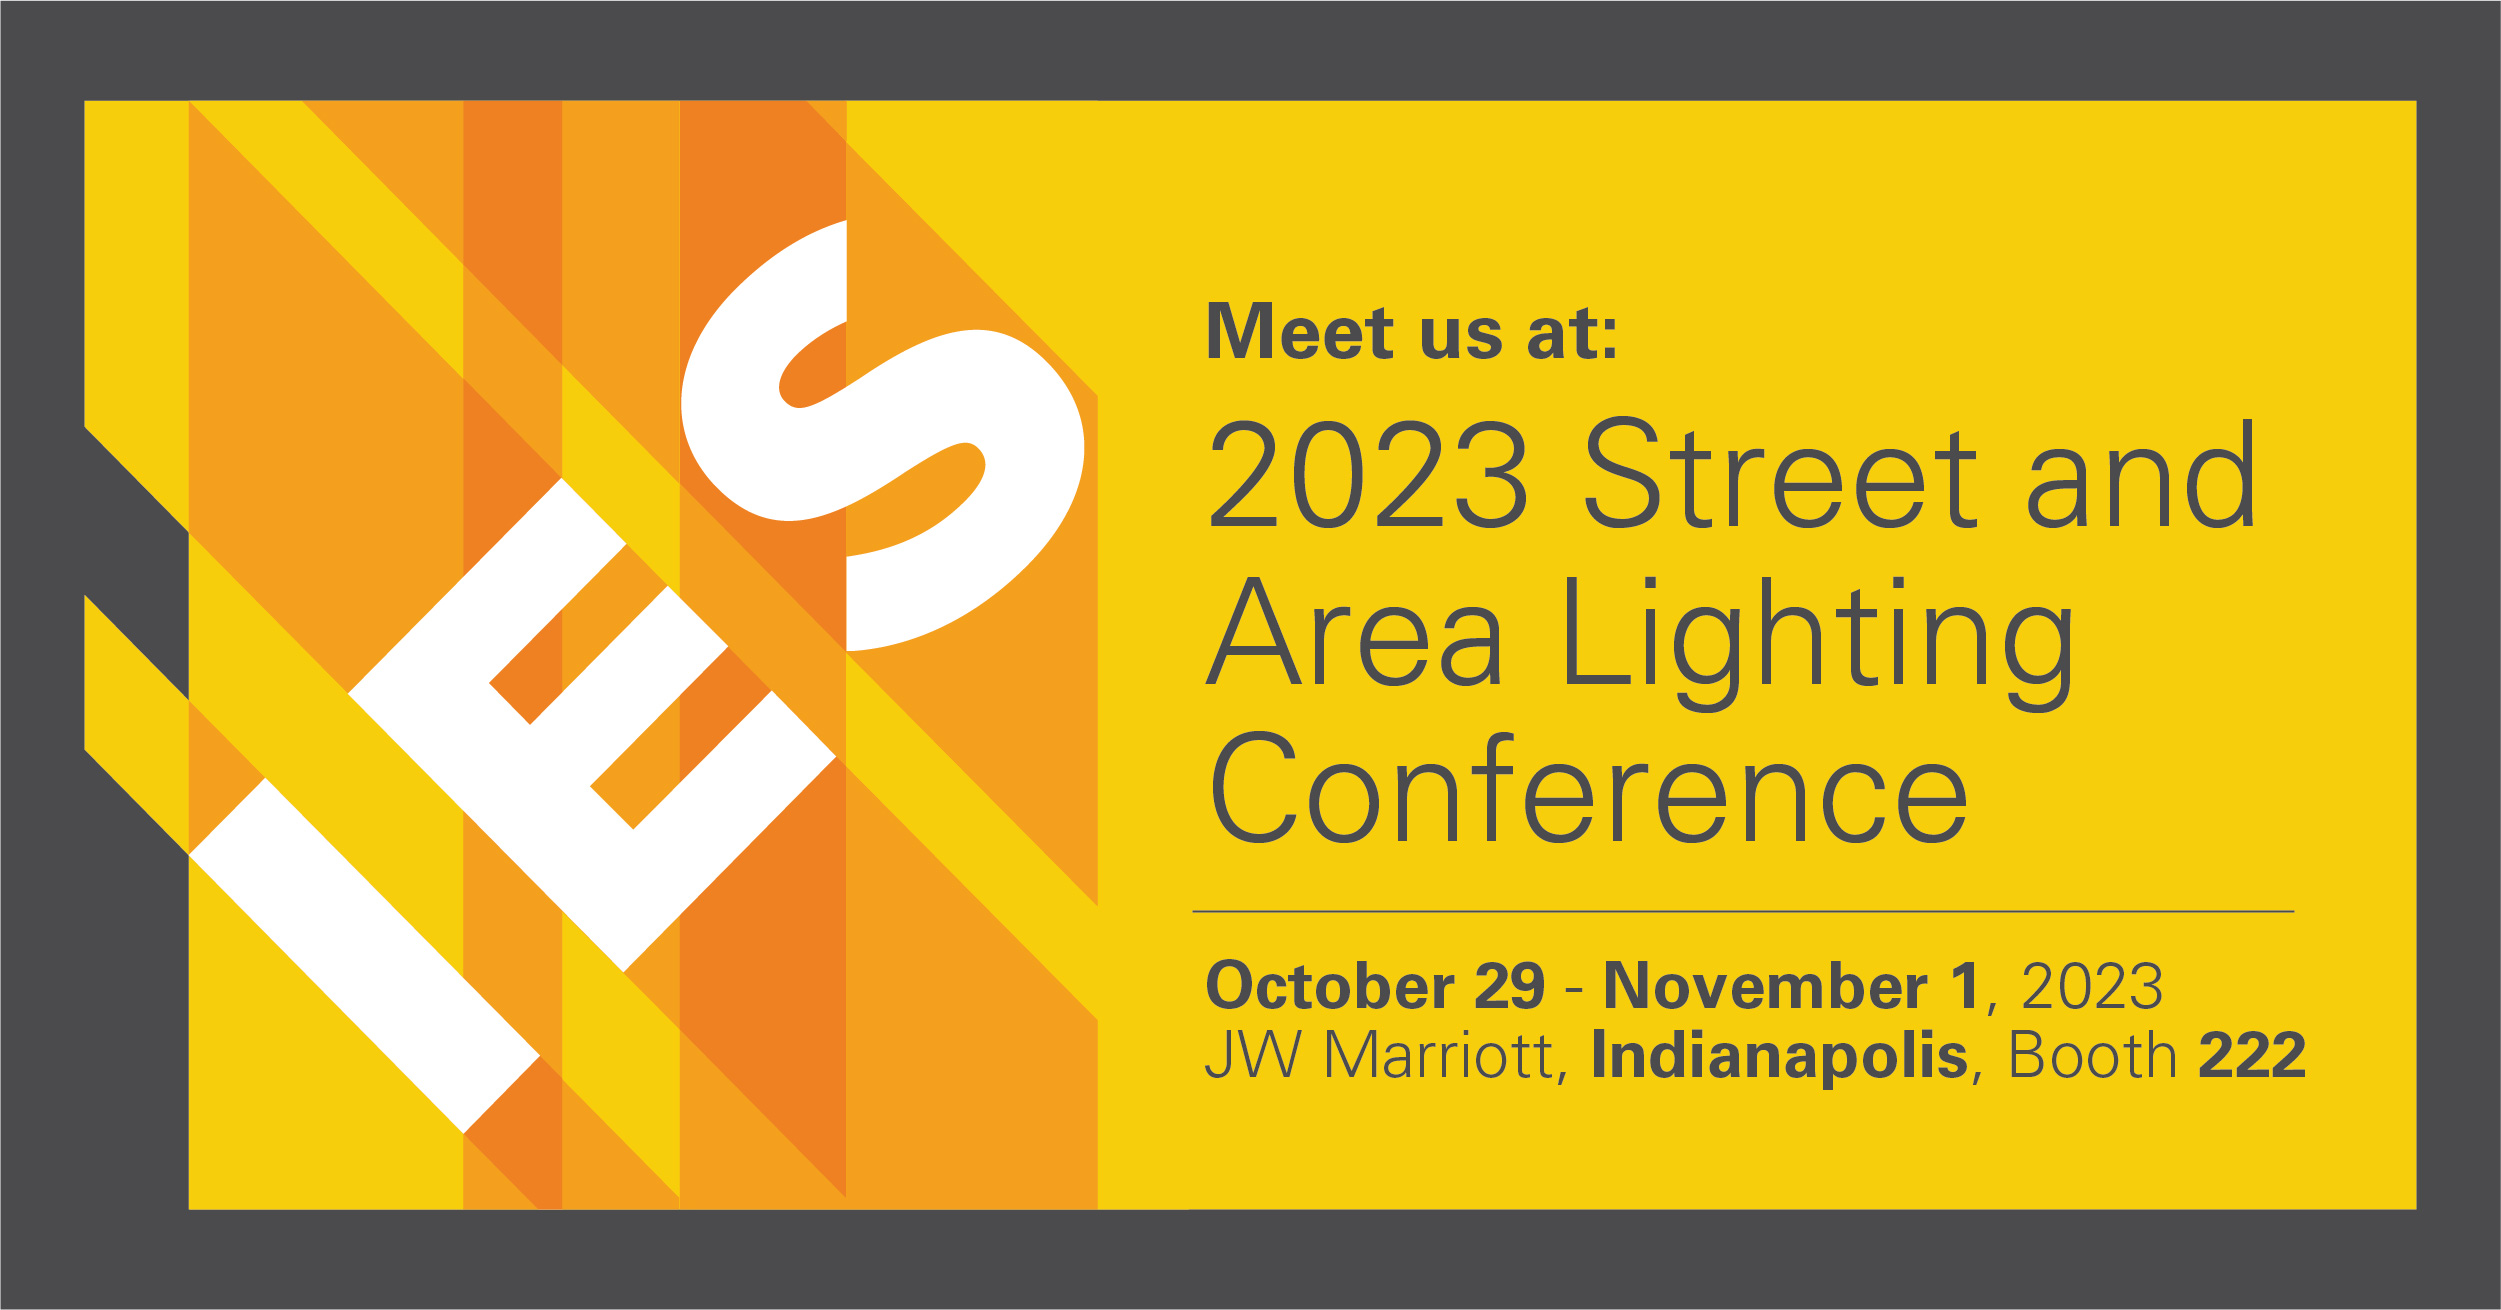 InteliLIGHT smart streetlight control solution to be showcased at IES SALC Indianapolis 2023